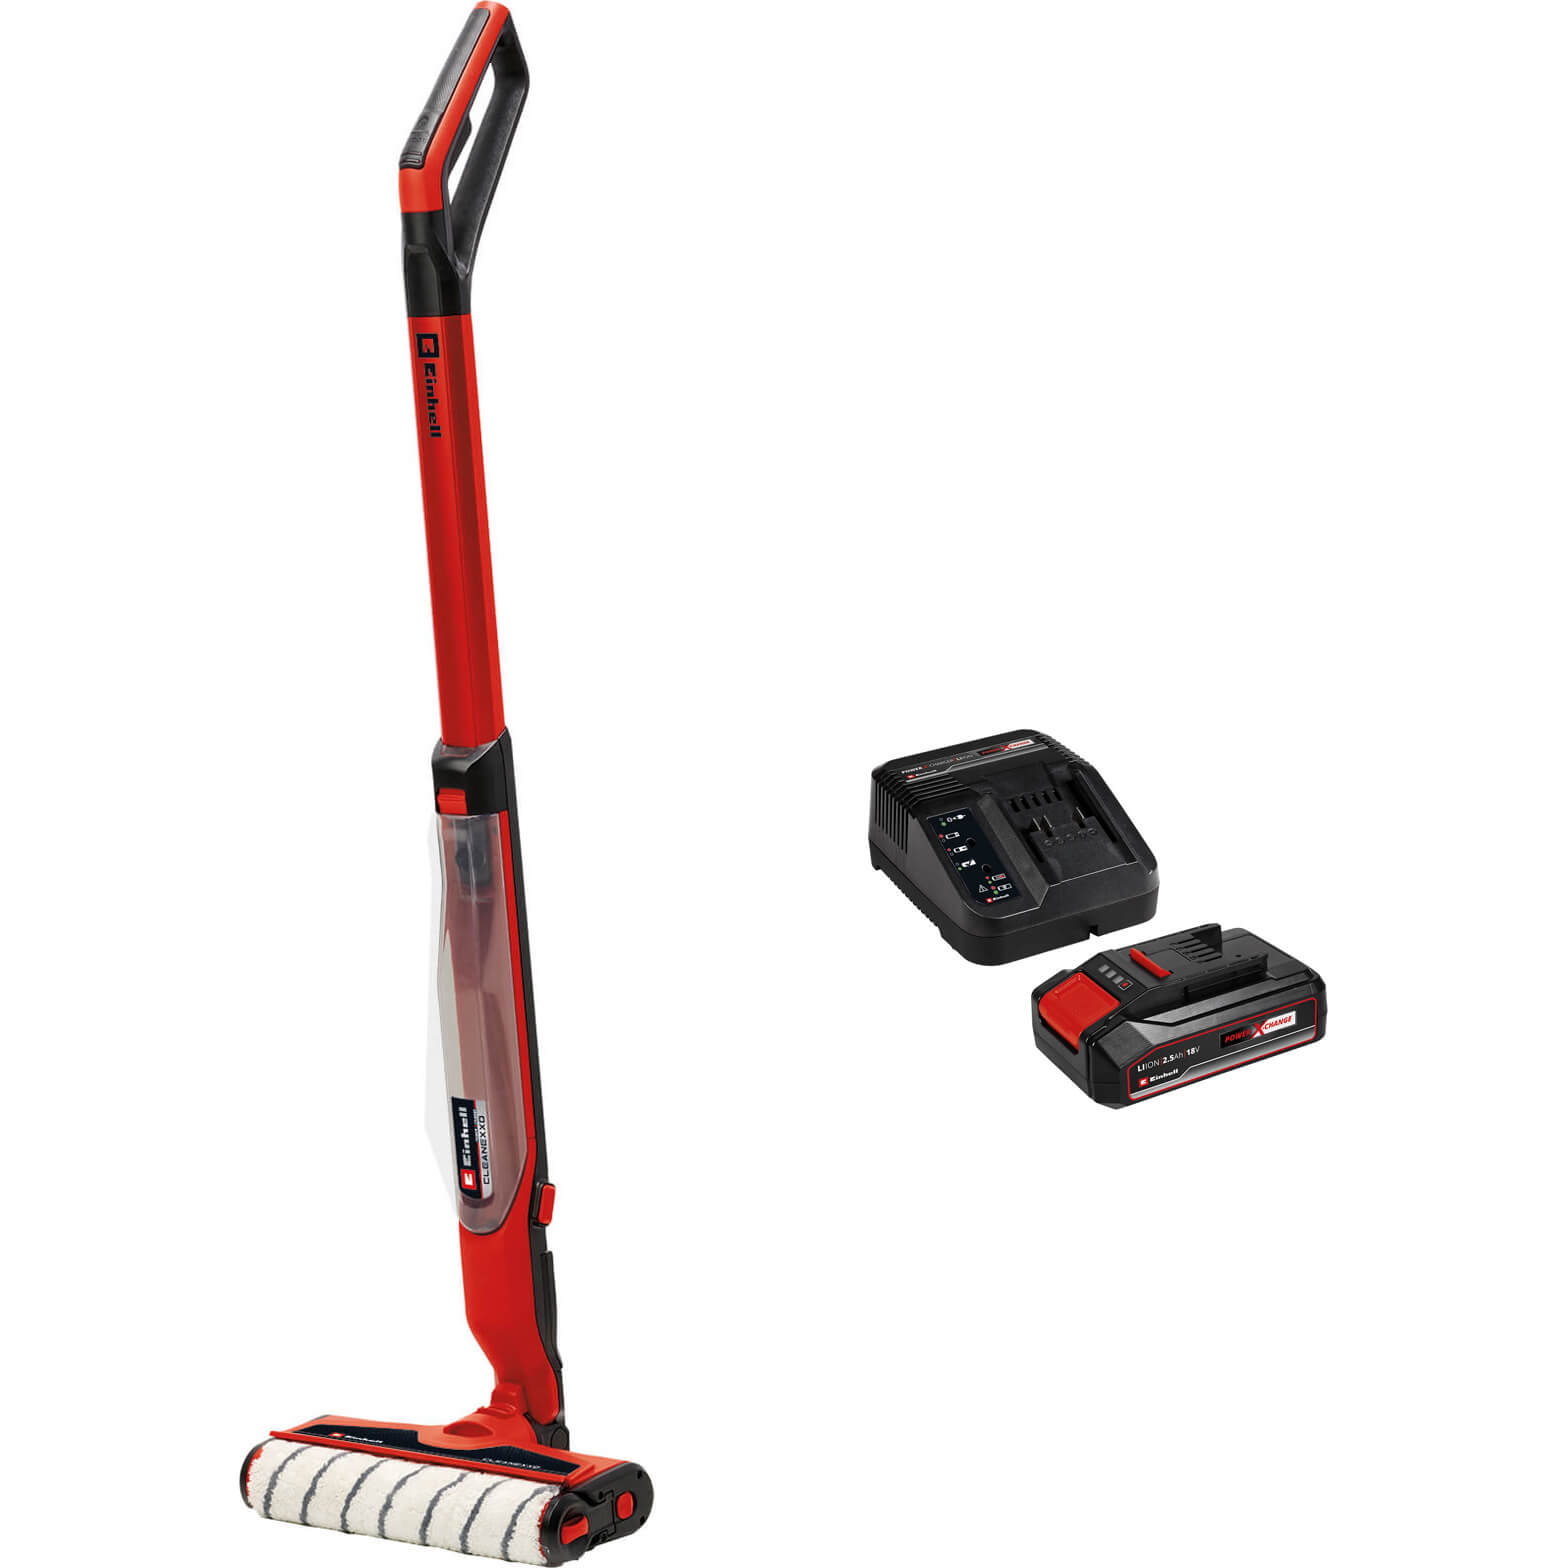 Photos - Other household chemicals Einhell CLEANEXXO 18v Cordless Hard Floor Cleaner 1 x 2.5ah Li-ion Charger 